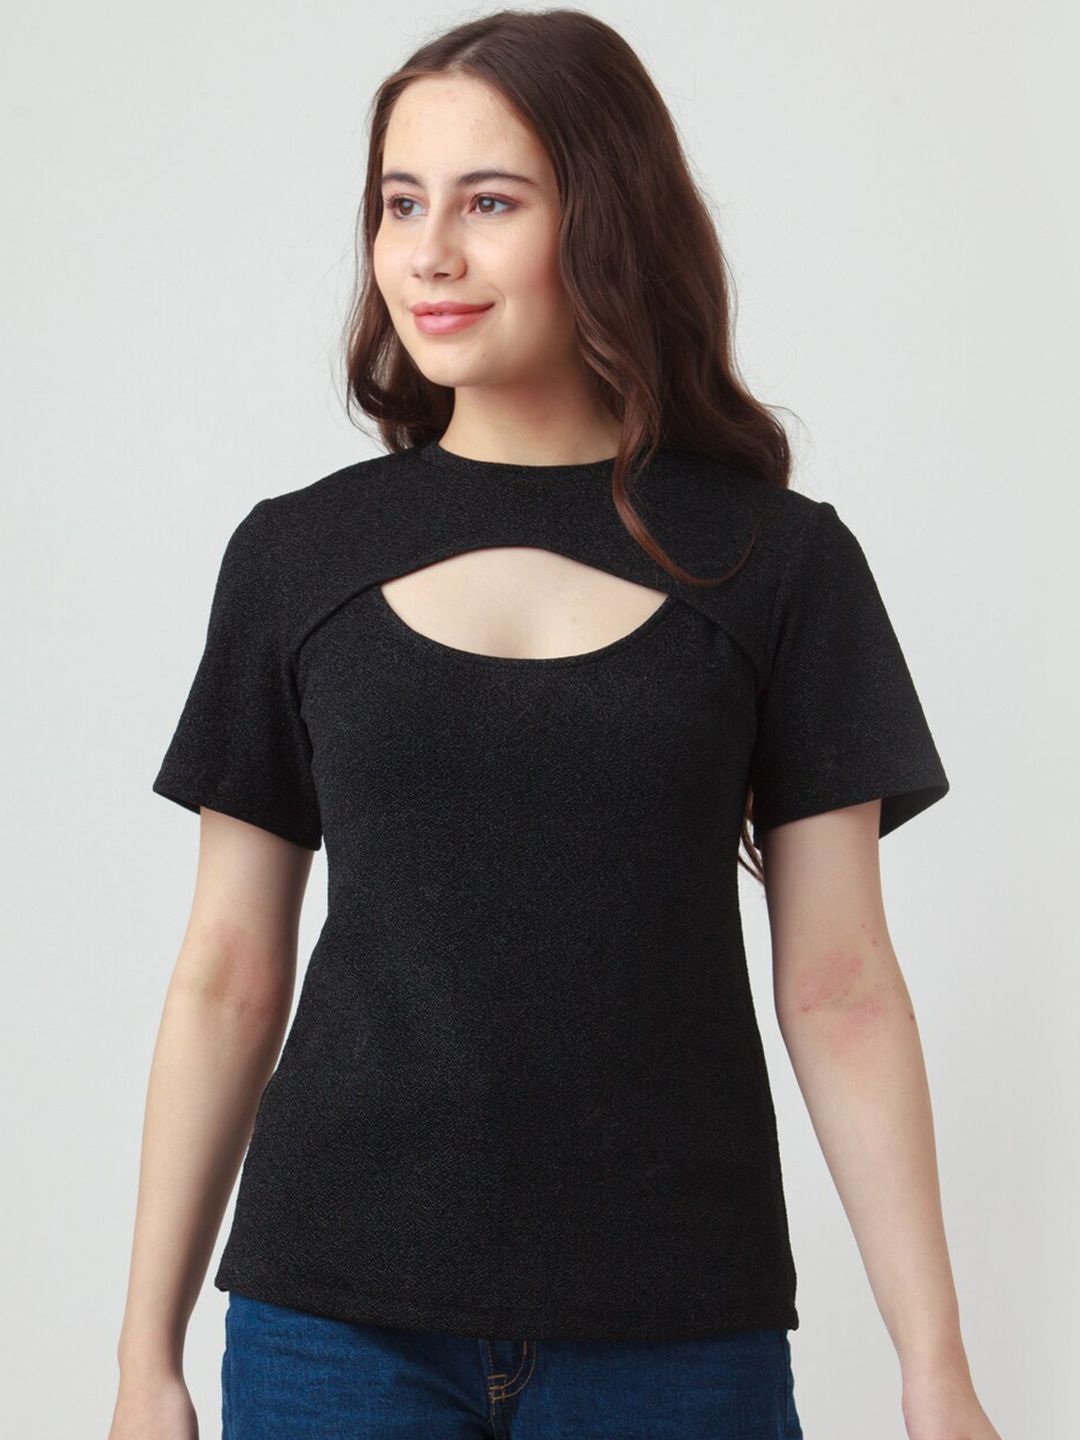 Zink London Black Cut Out Regular Top Price in India